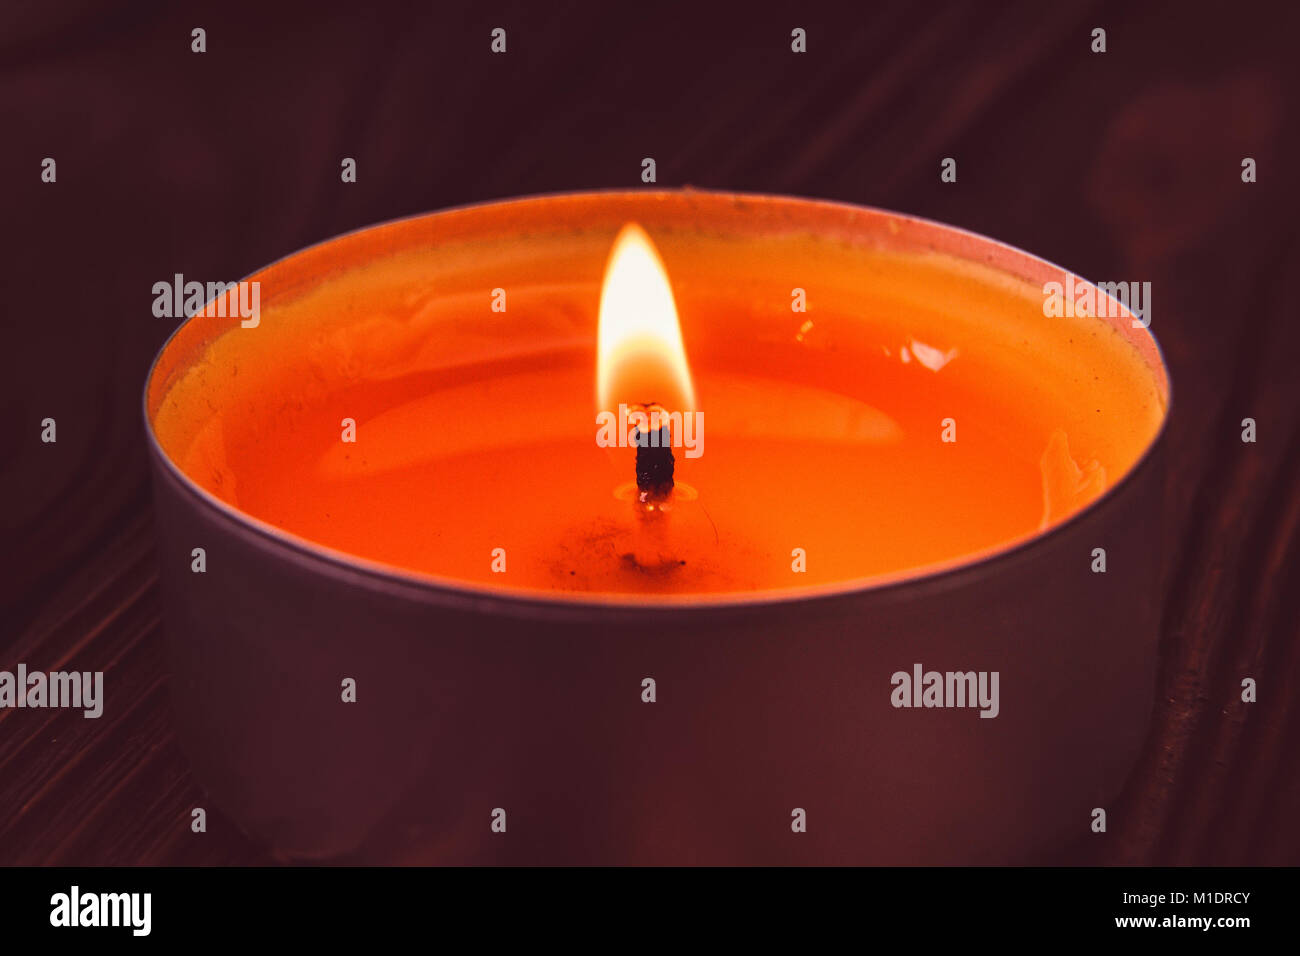 Small white candle burns on dark background Stock Photo